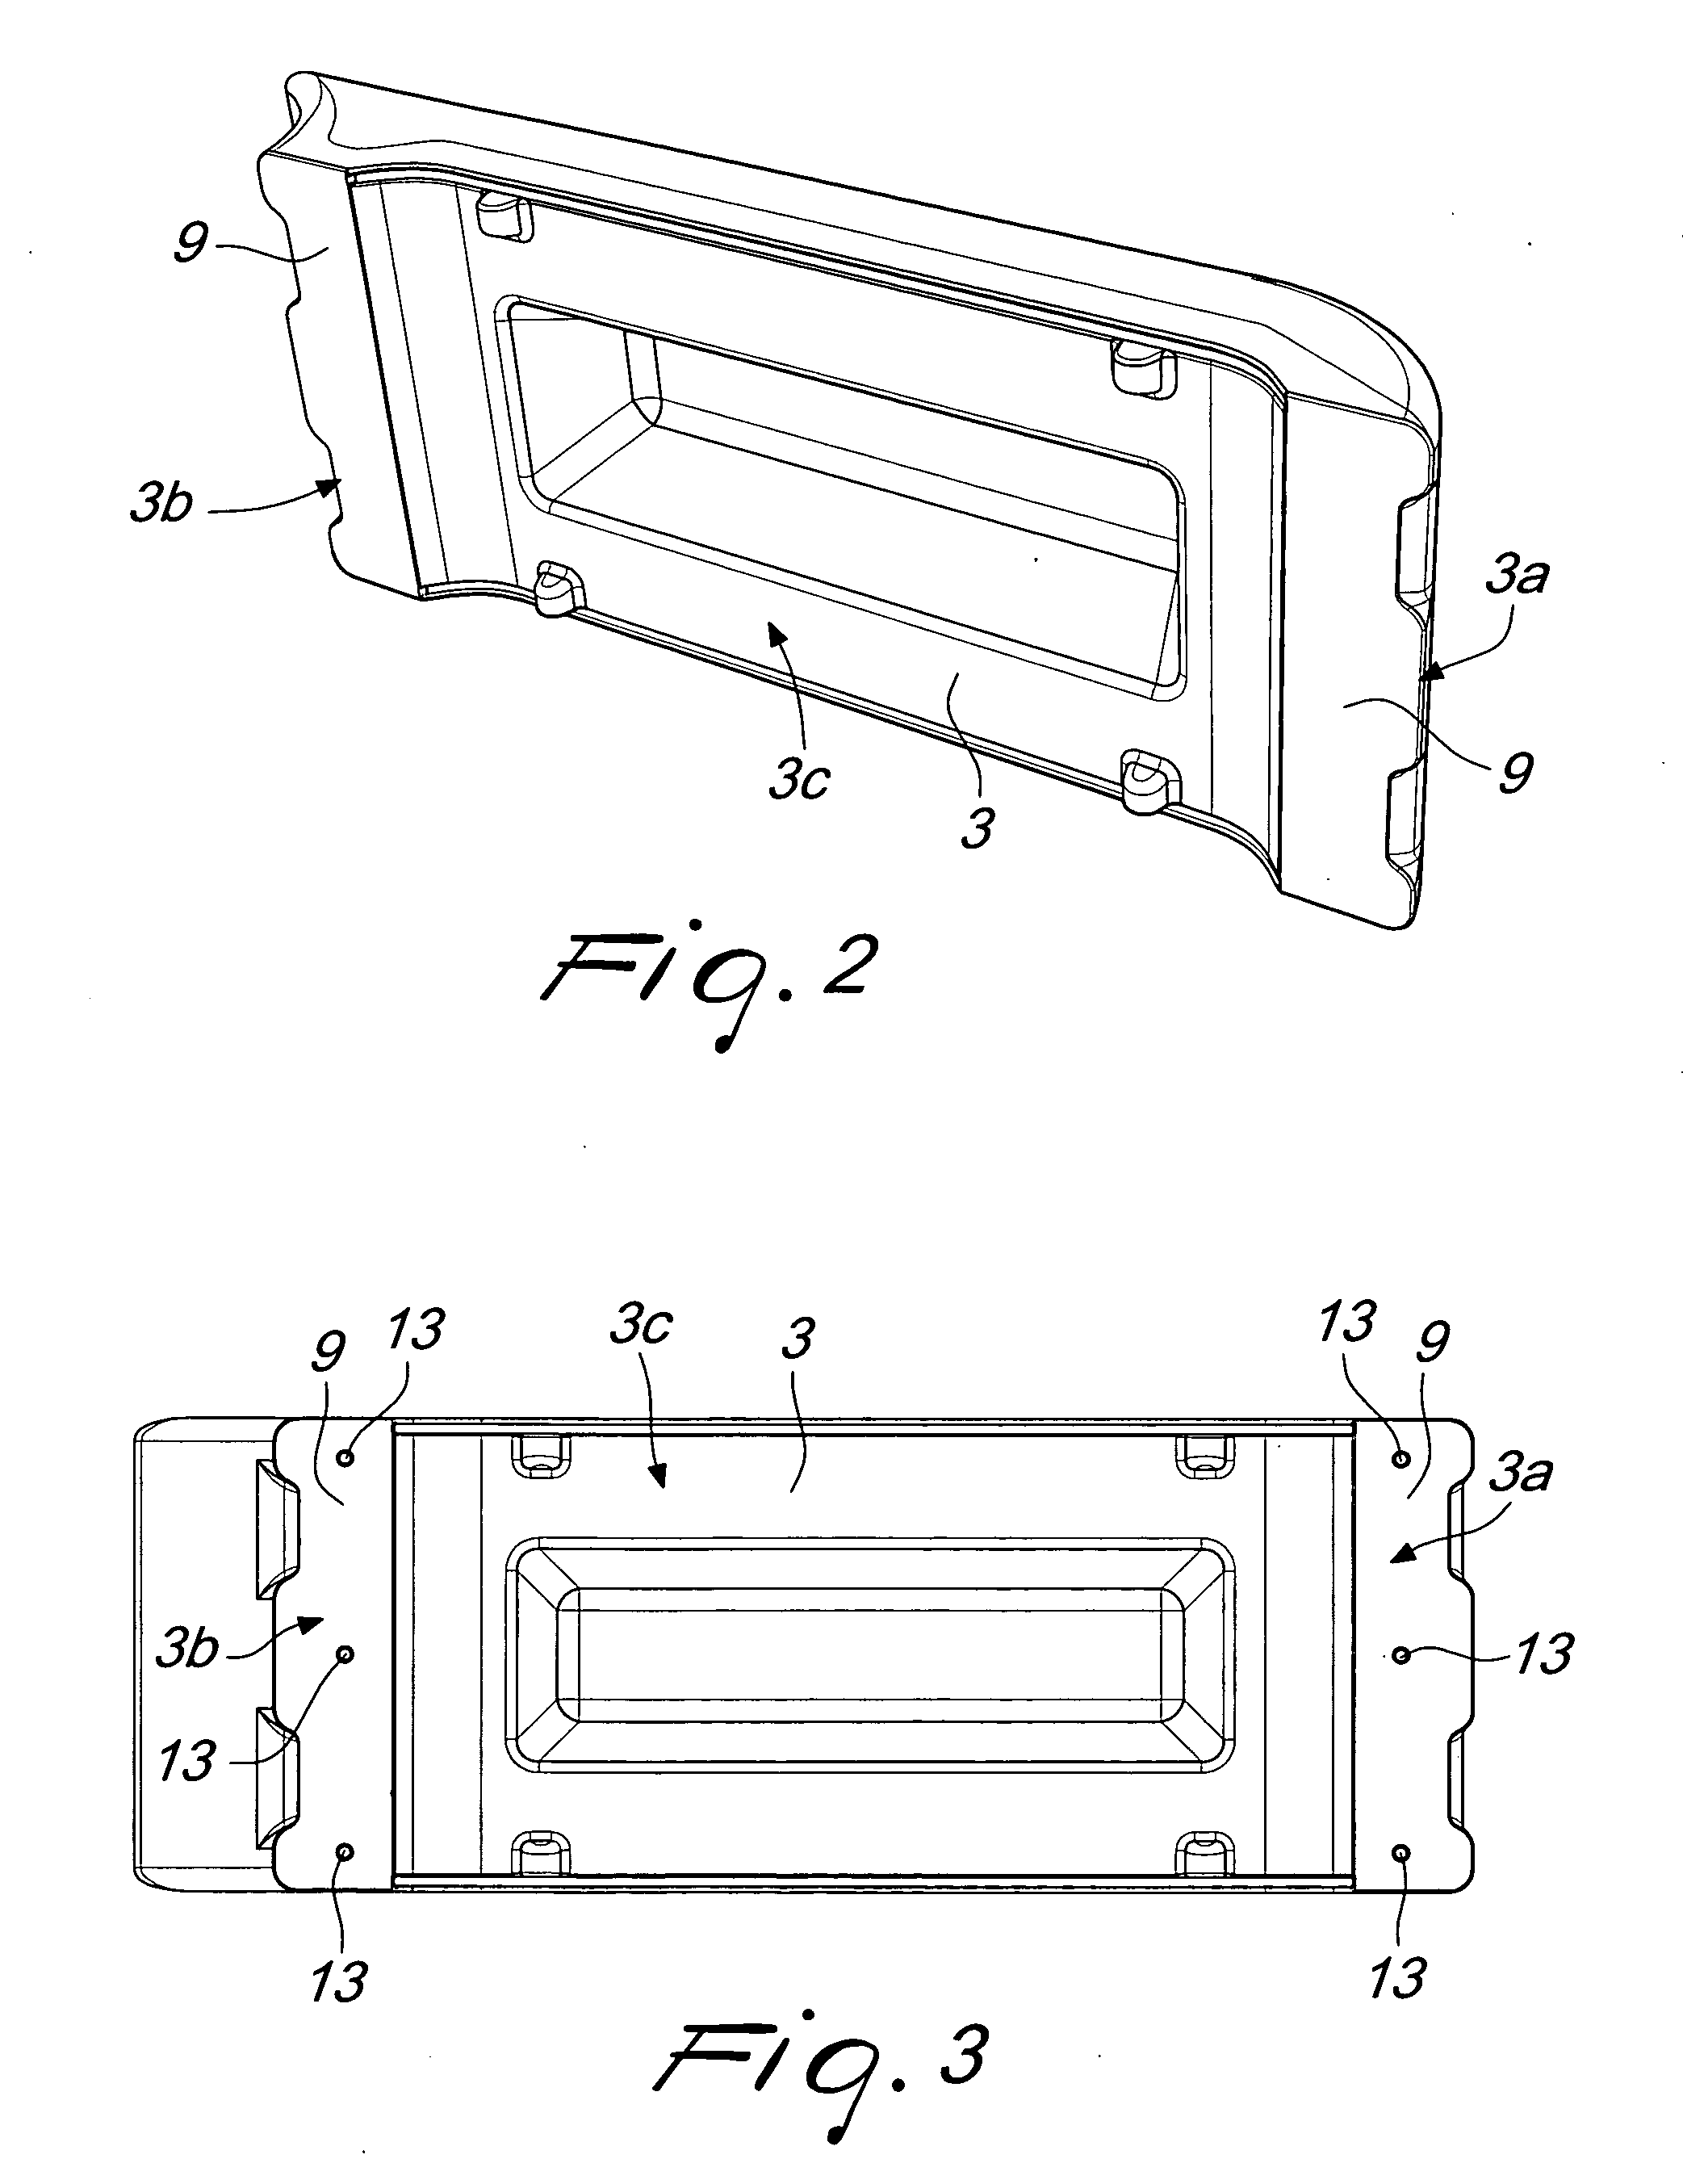 Delimitation barrier, particularly for motor driving circuits